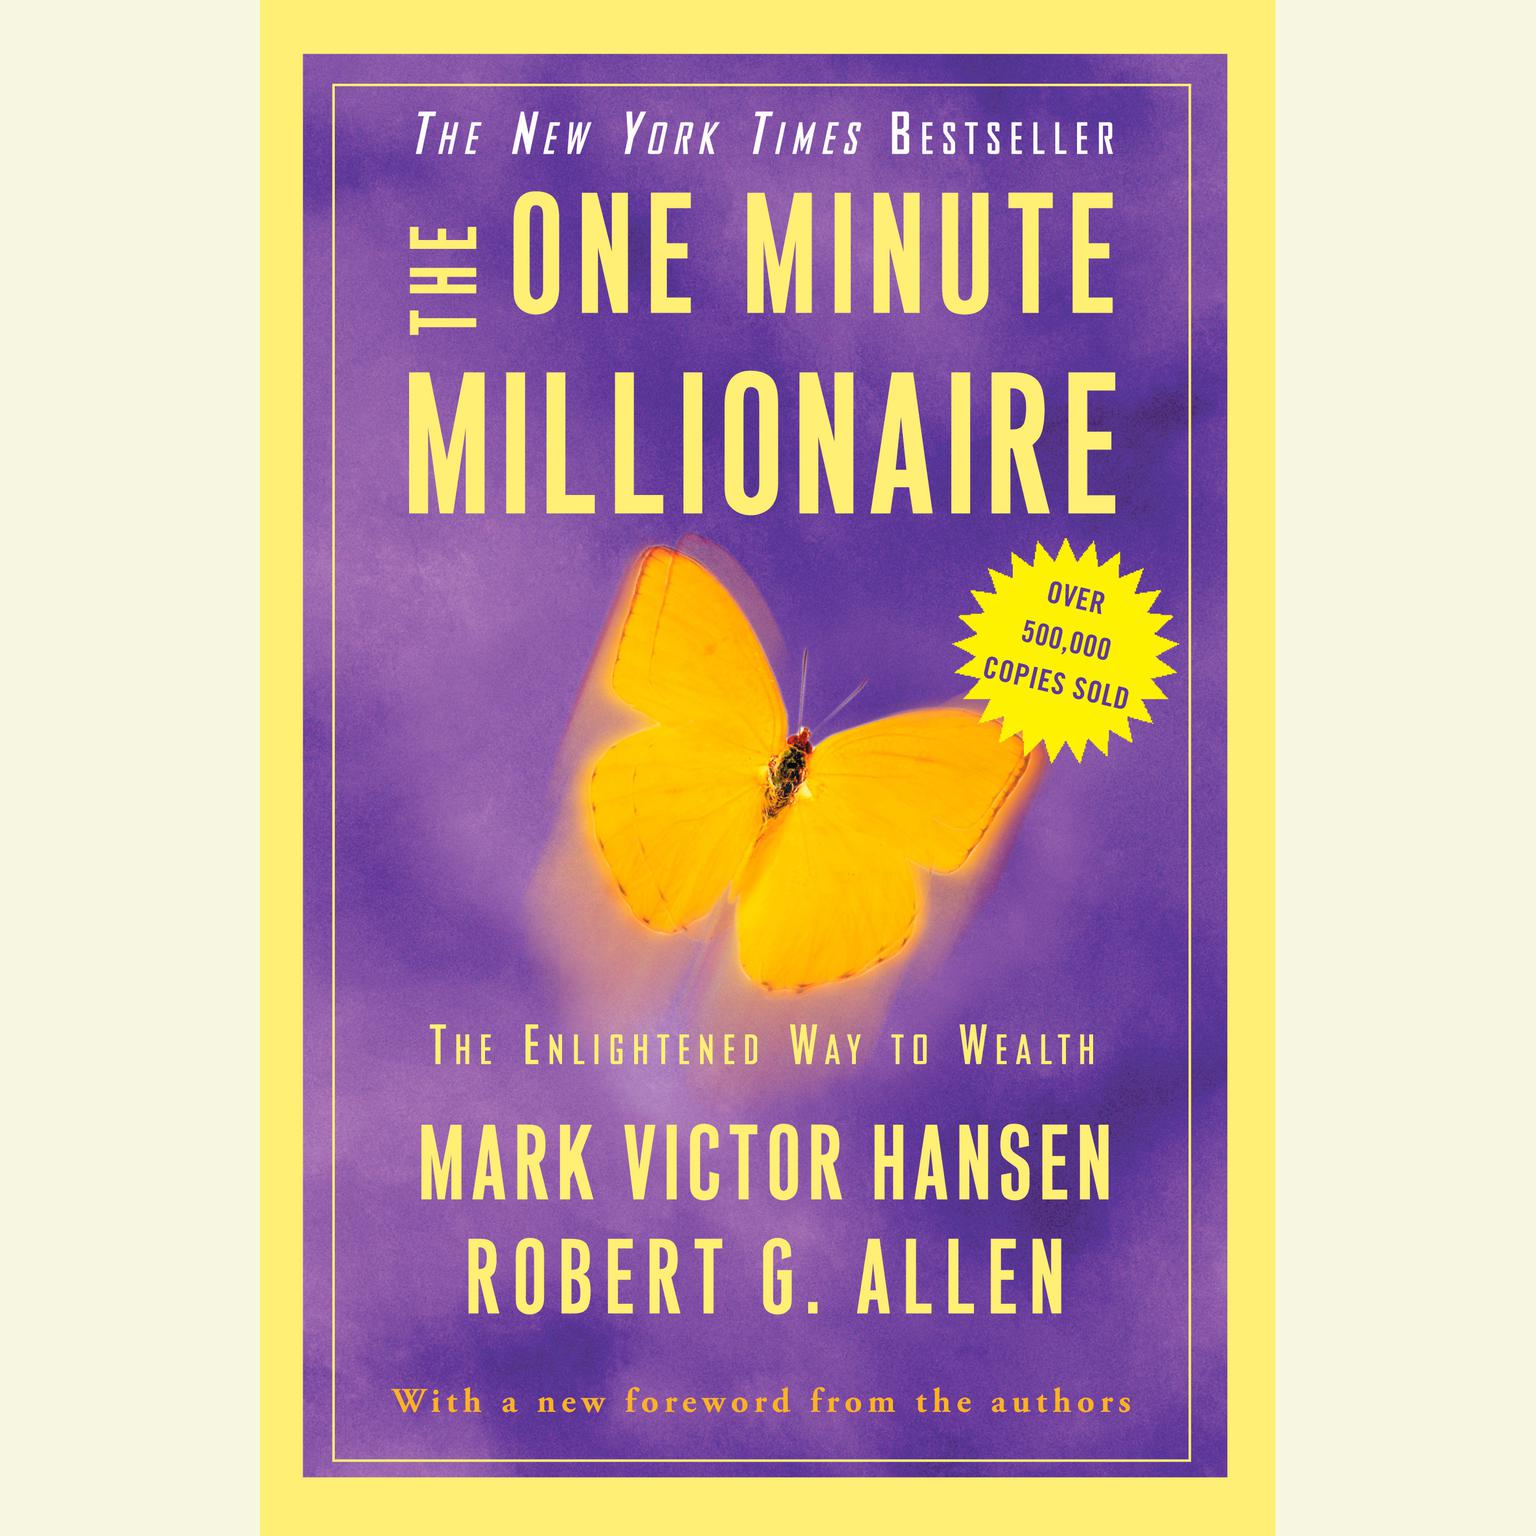 The One Minute Millionaire (Abridged): The Enlightened Way to Wealth Audiobook, by Mark Victor Hansen